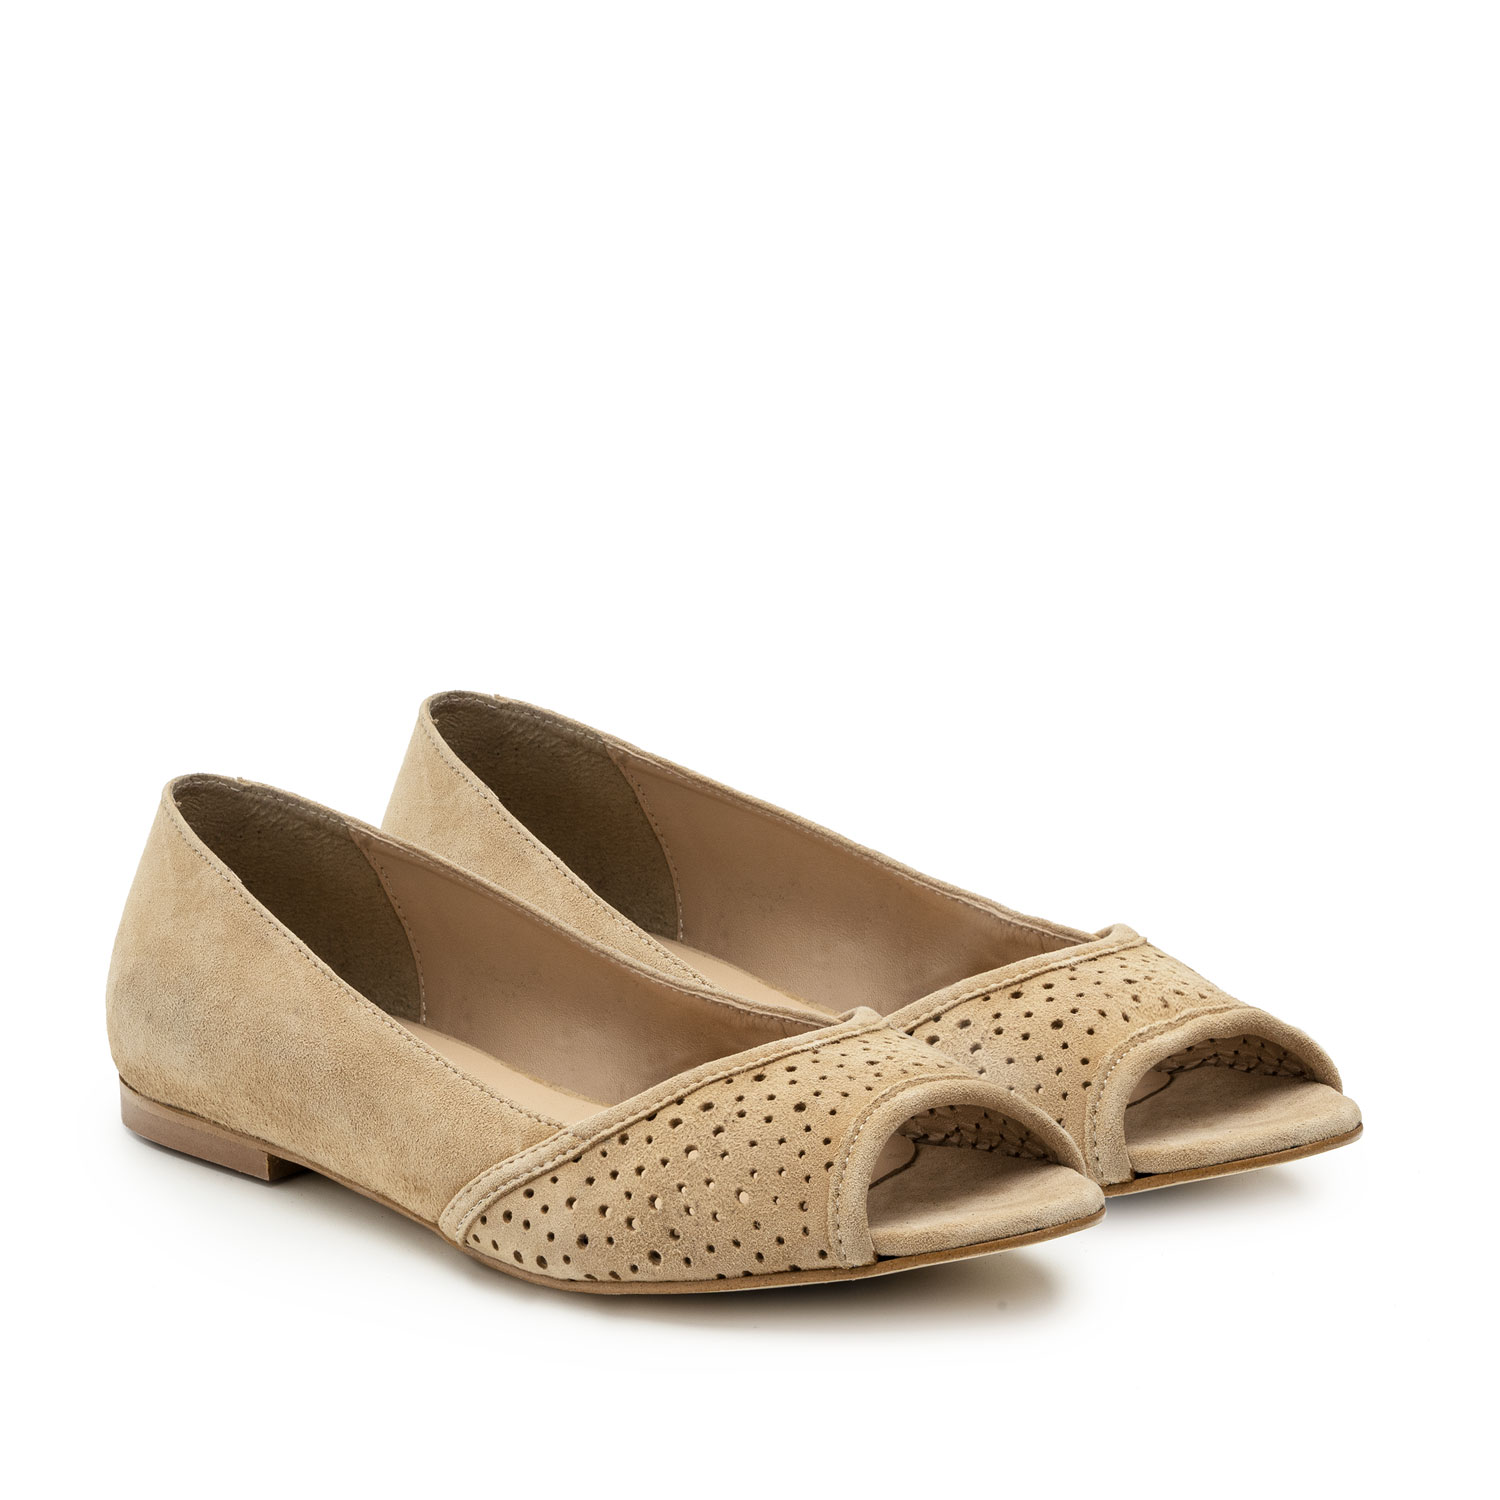 Open Toe Ballet Flats in Camel Suede Leather 